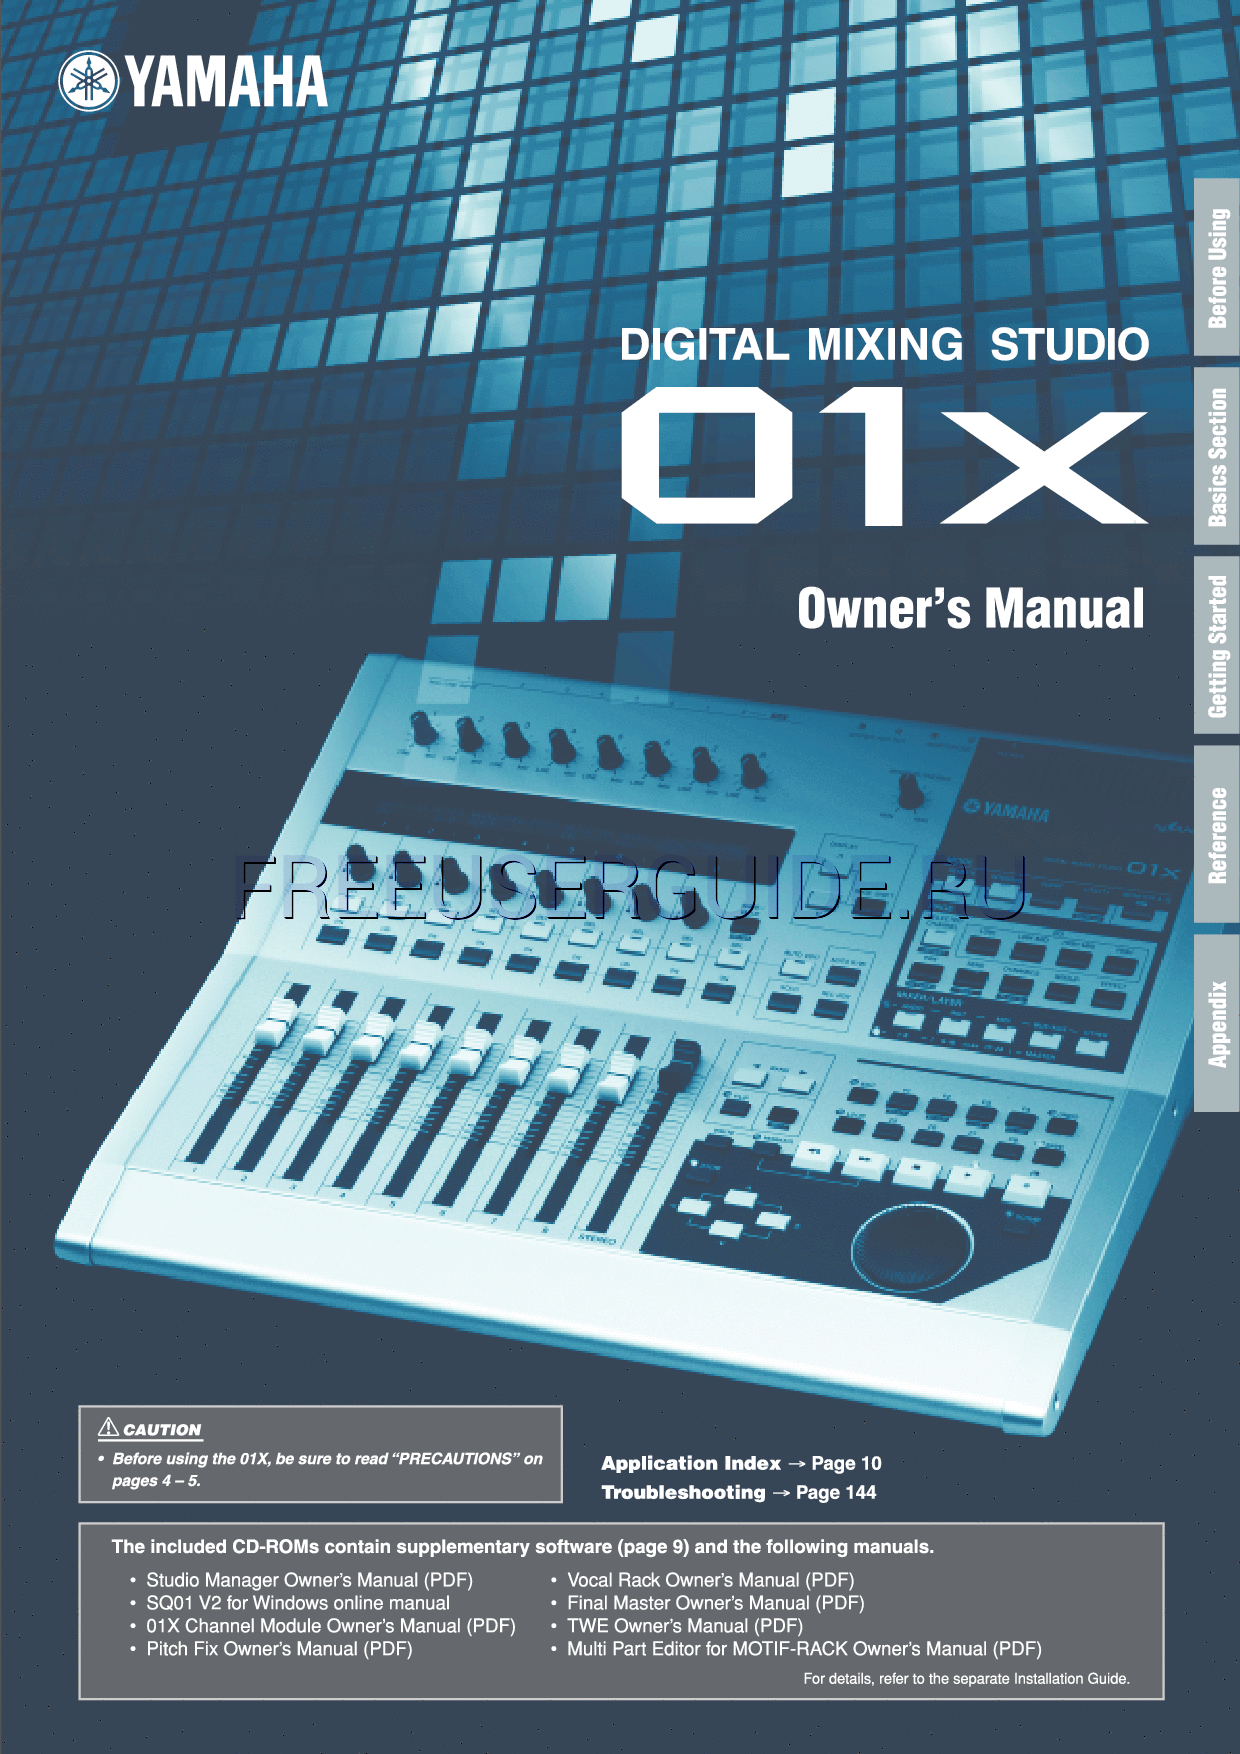 Read online User's Manual for Yamaha DIGITAL MIXING STUDIO 01X (Page 1)